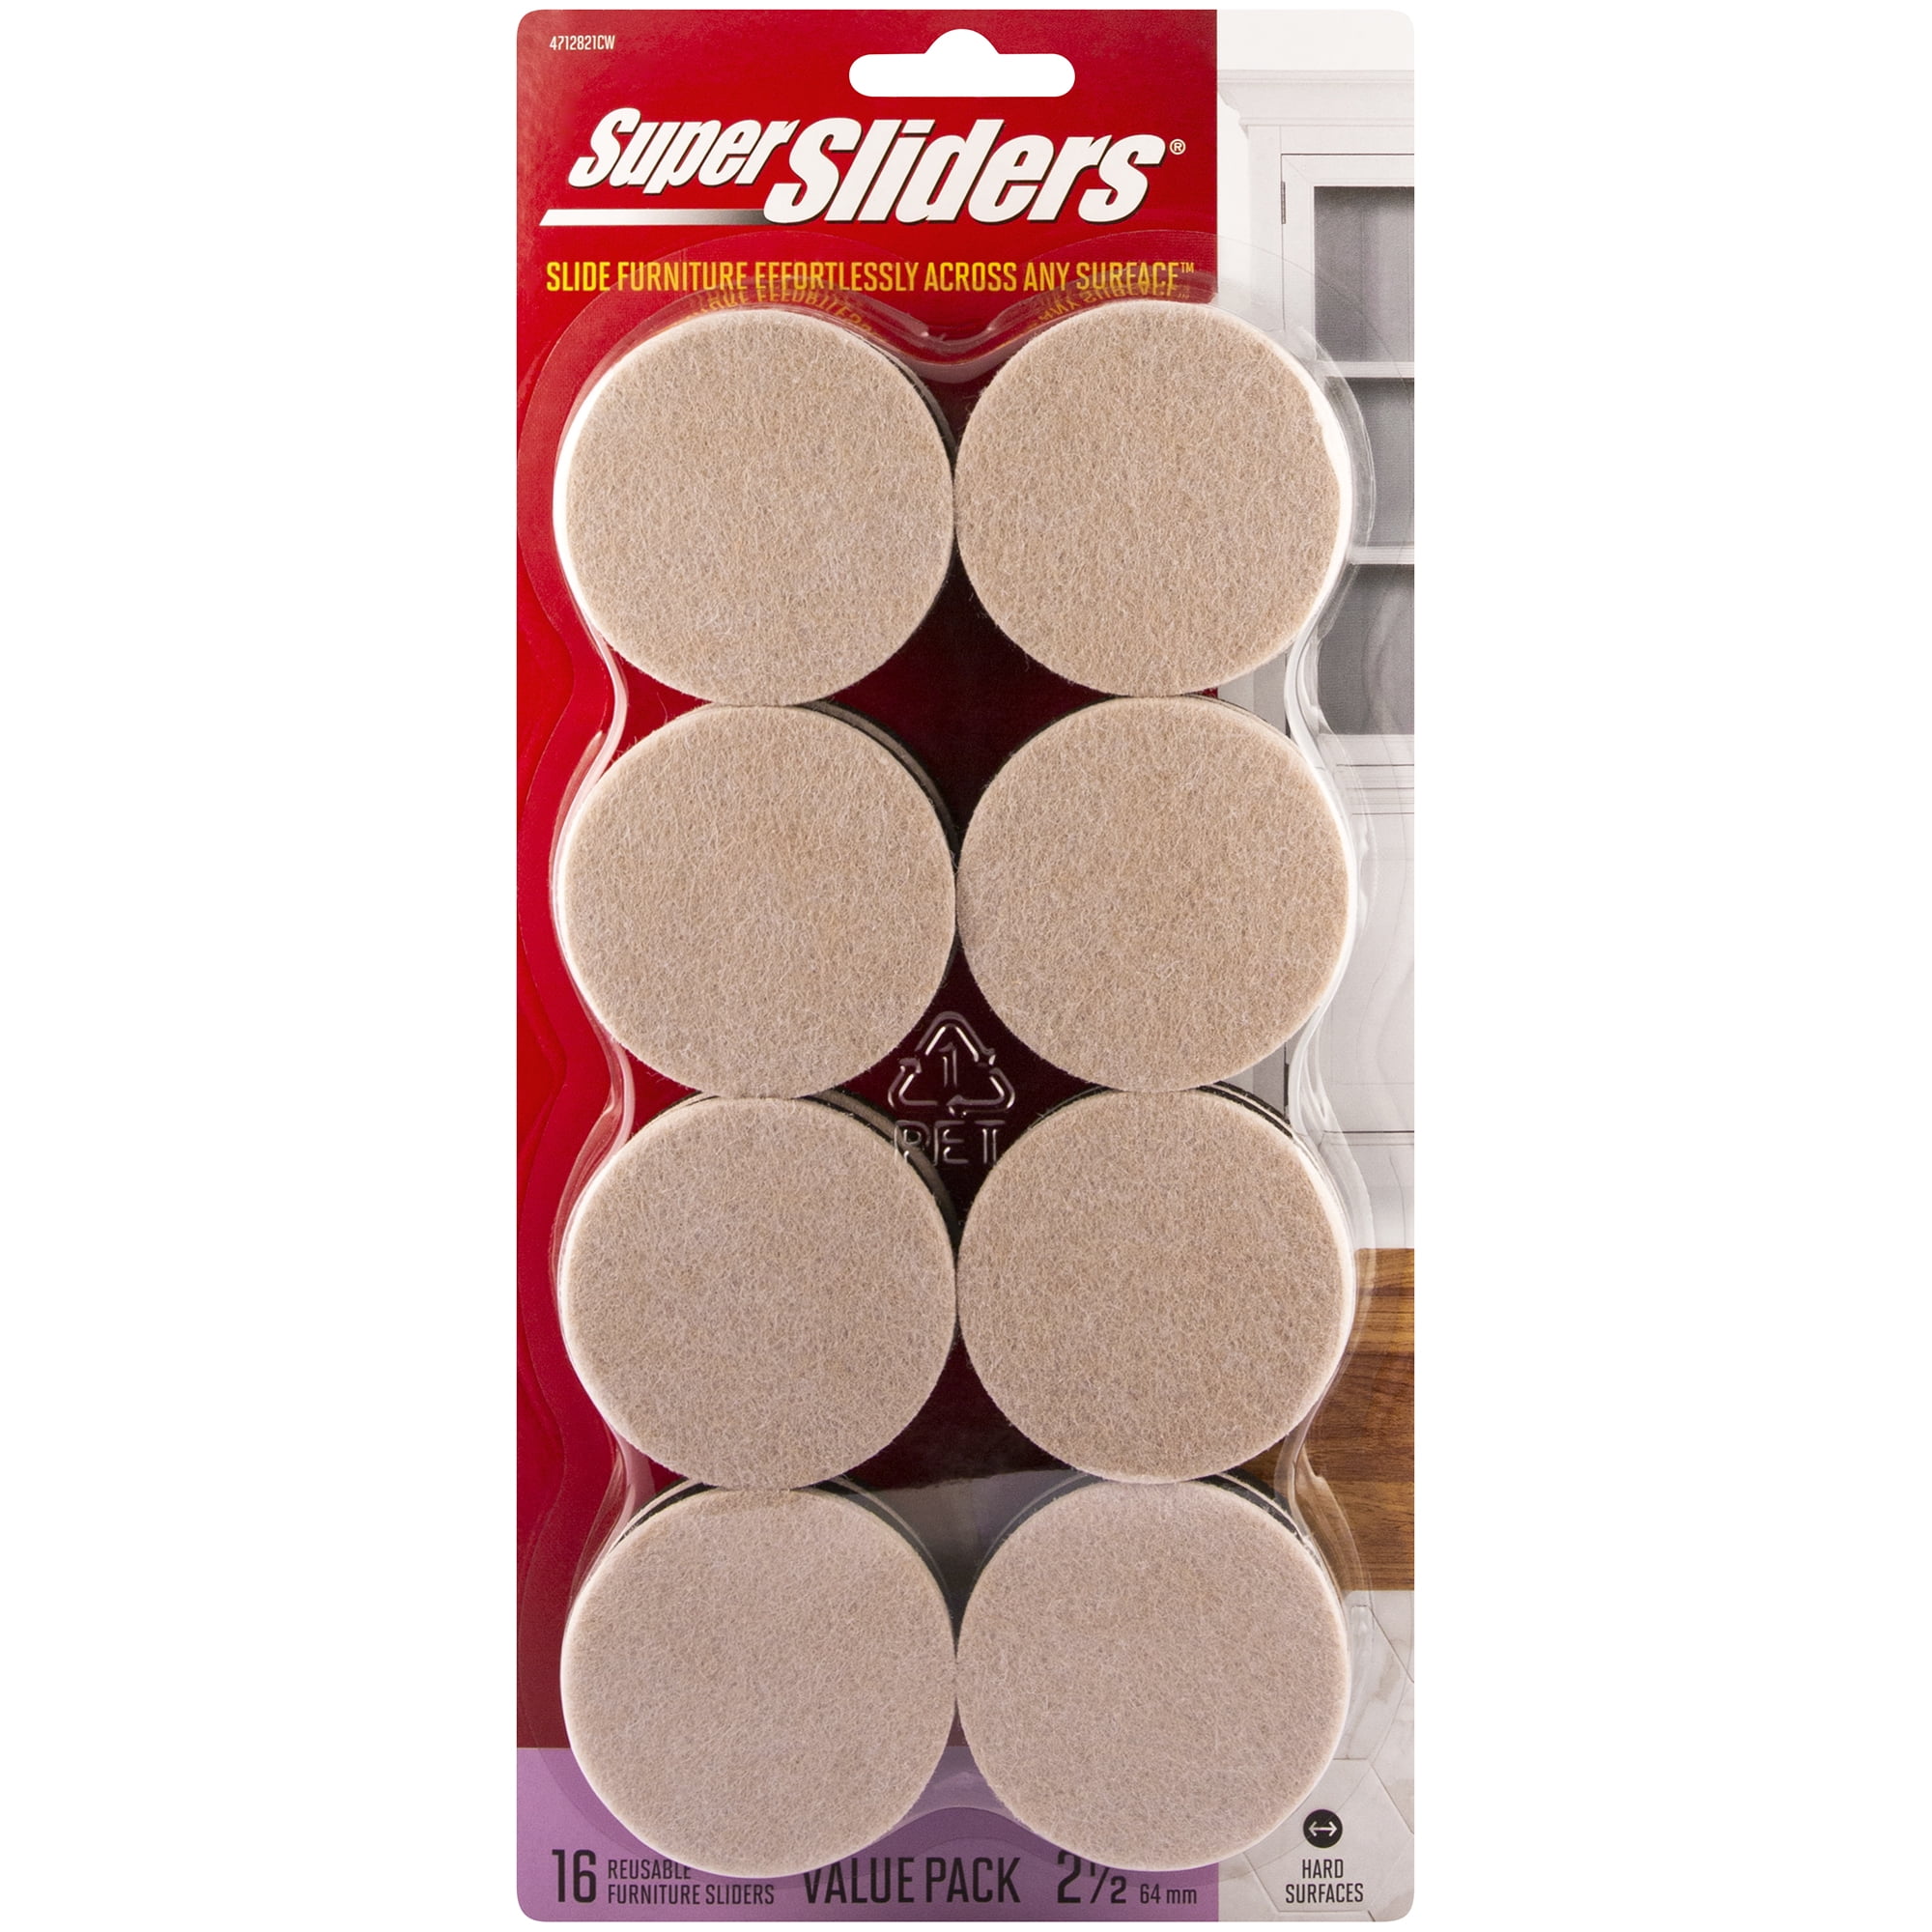 Super Sliders 5 3/4 x 9 1/2 Oval Reusable Furniture Sliders for Hard Surfaces 8 Pack Effortless Moving and Surface Protection Brown